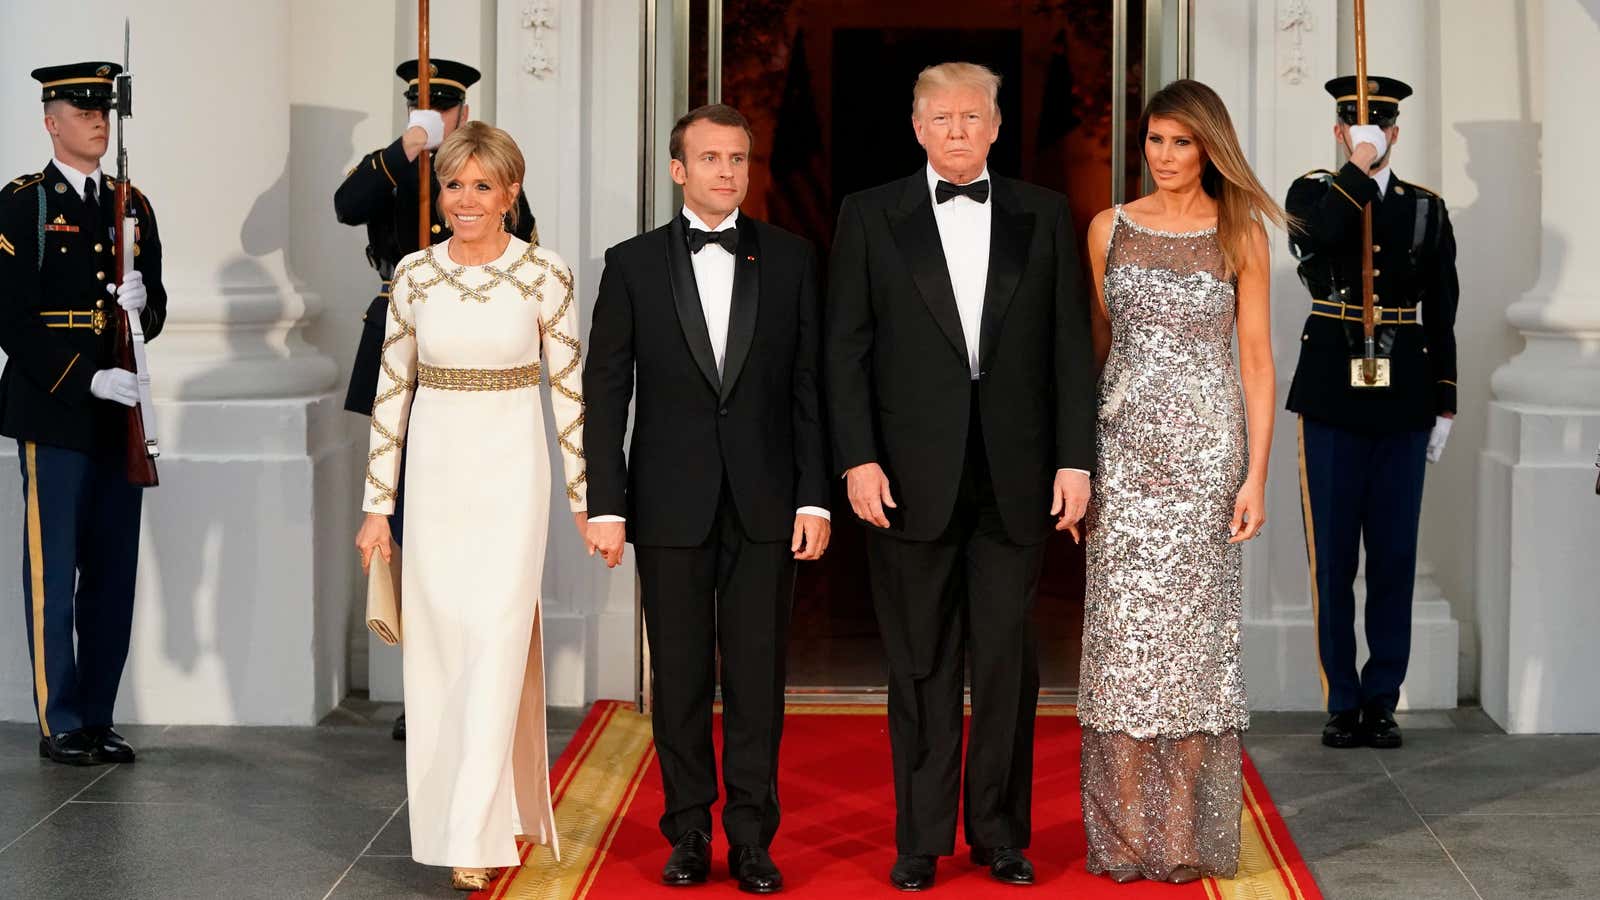 The Trumps, looking thrilled to be hosting their first state dinner.